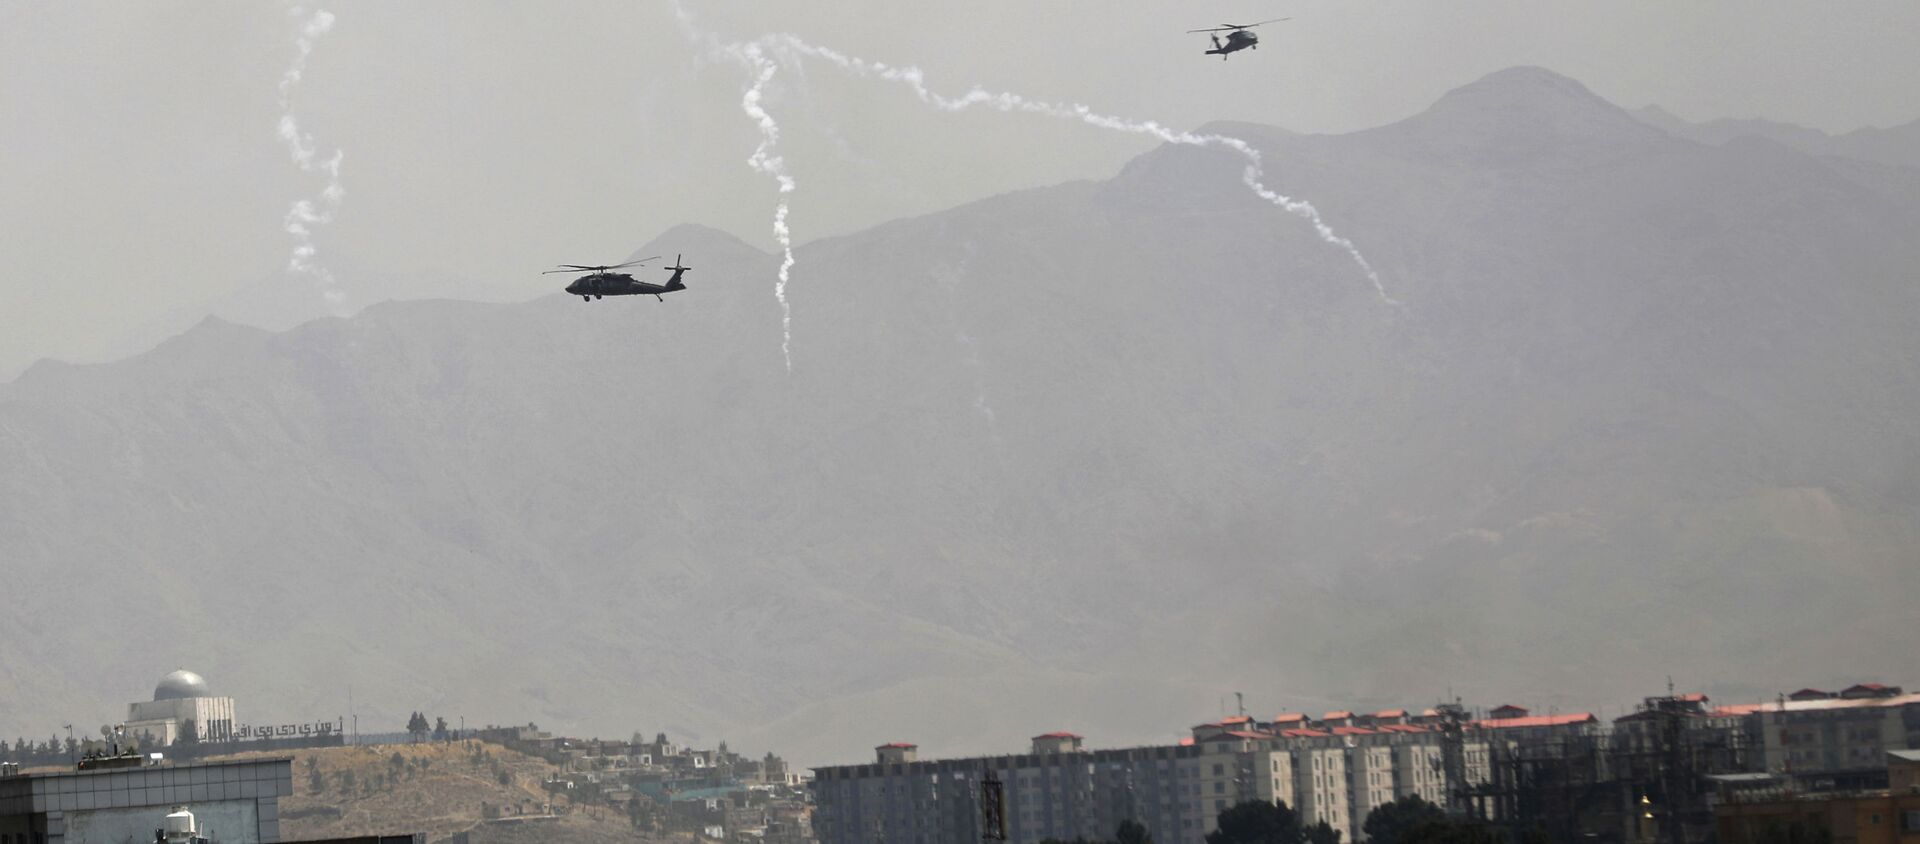 Anti-missile decoy flares are deployed as U.S. Black Hawk military helicopters and a dirigible balloon fly over the city of Kabul, Afghanistan, Sunday, Aug. 15, 2021. - Sputnik International, 1920